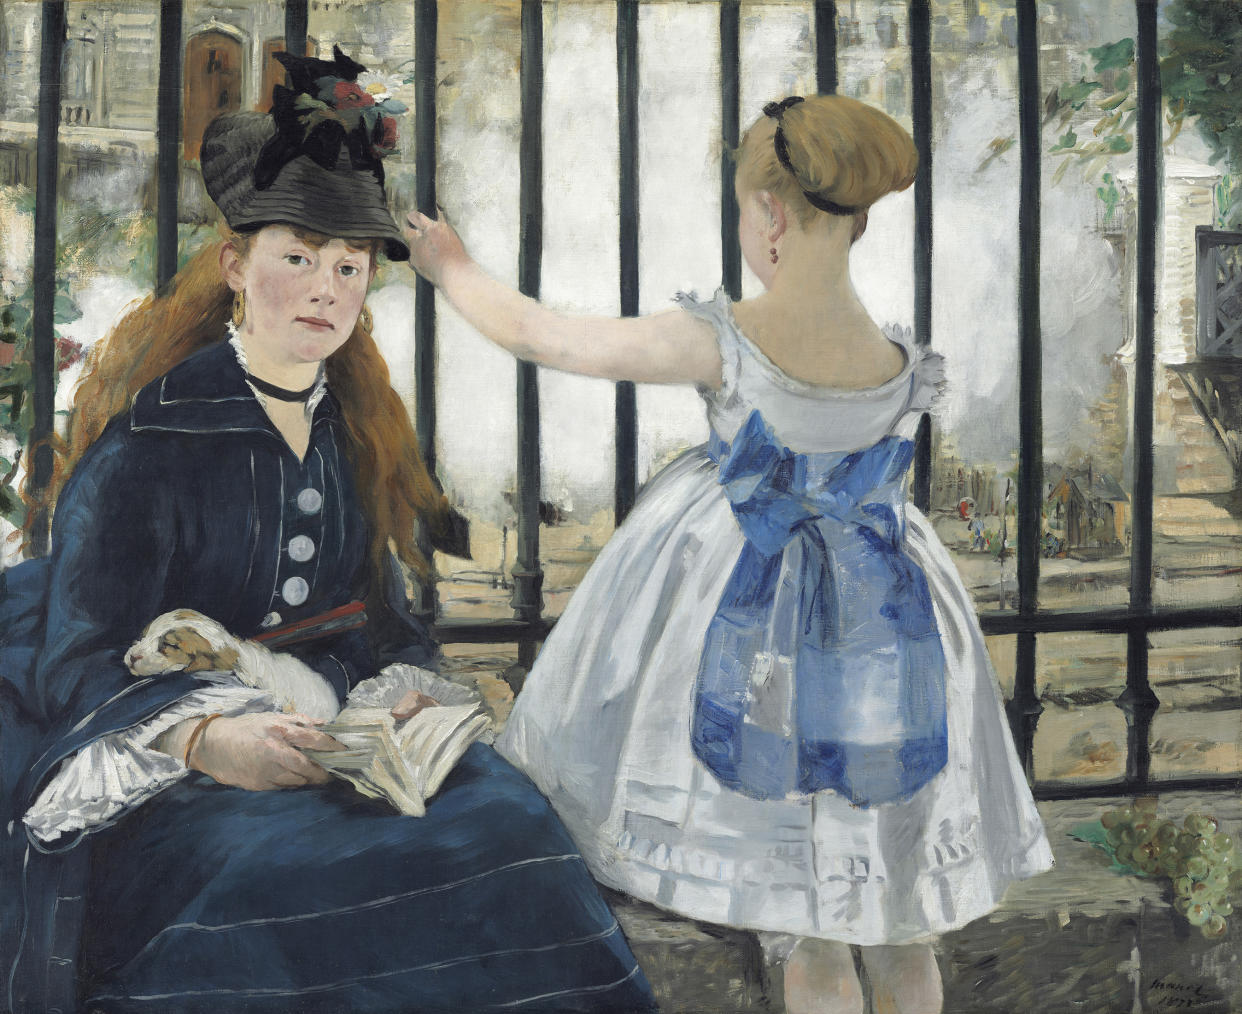  The Railway painting by Édouard Manet. 